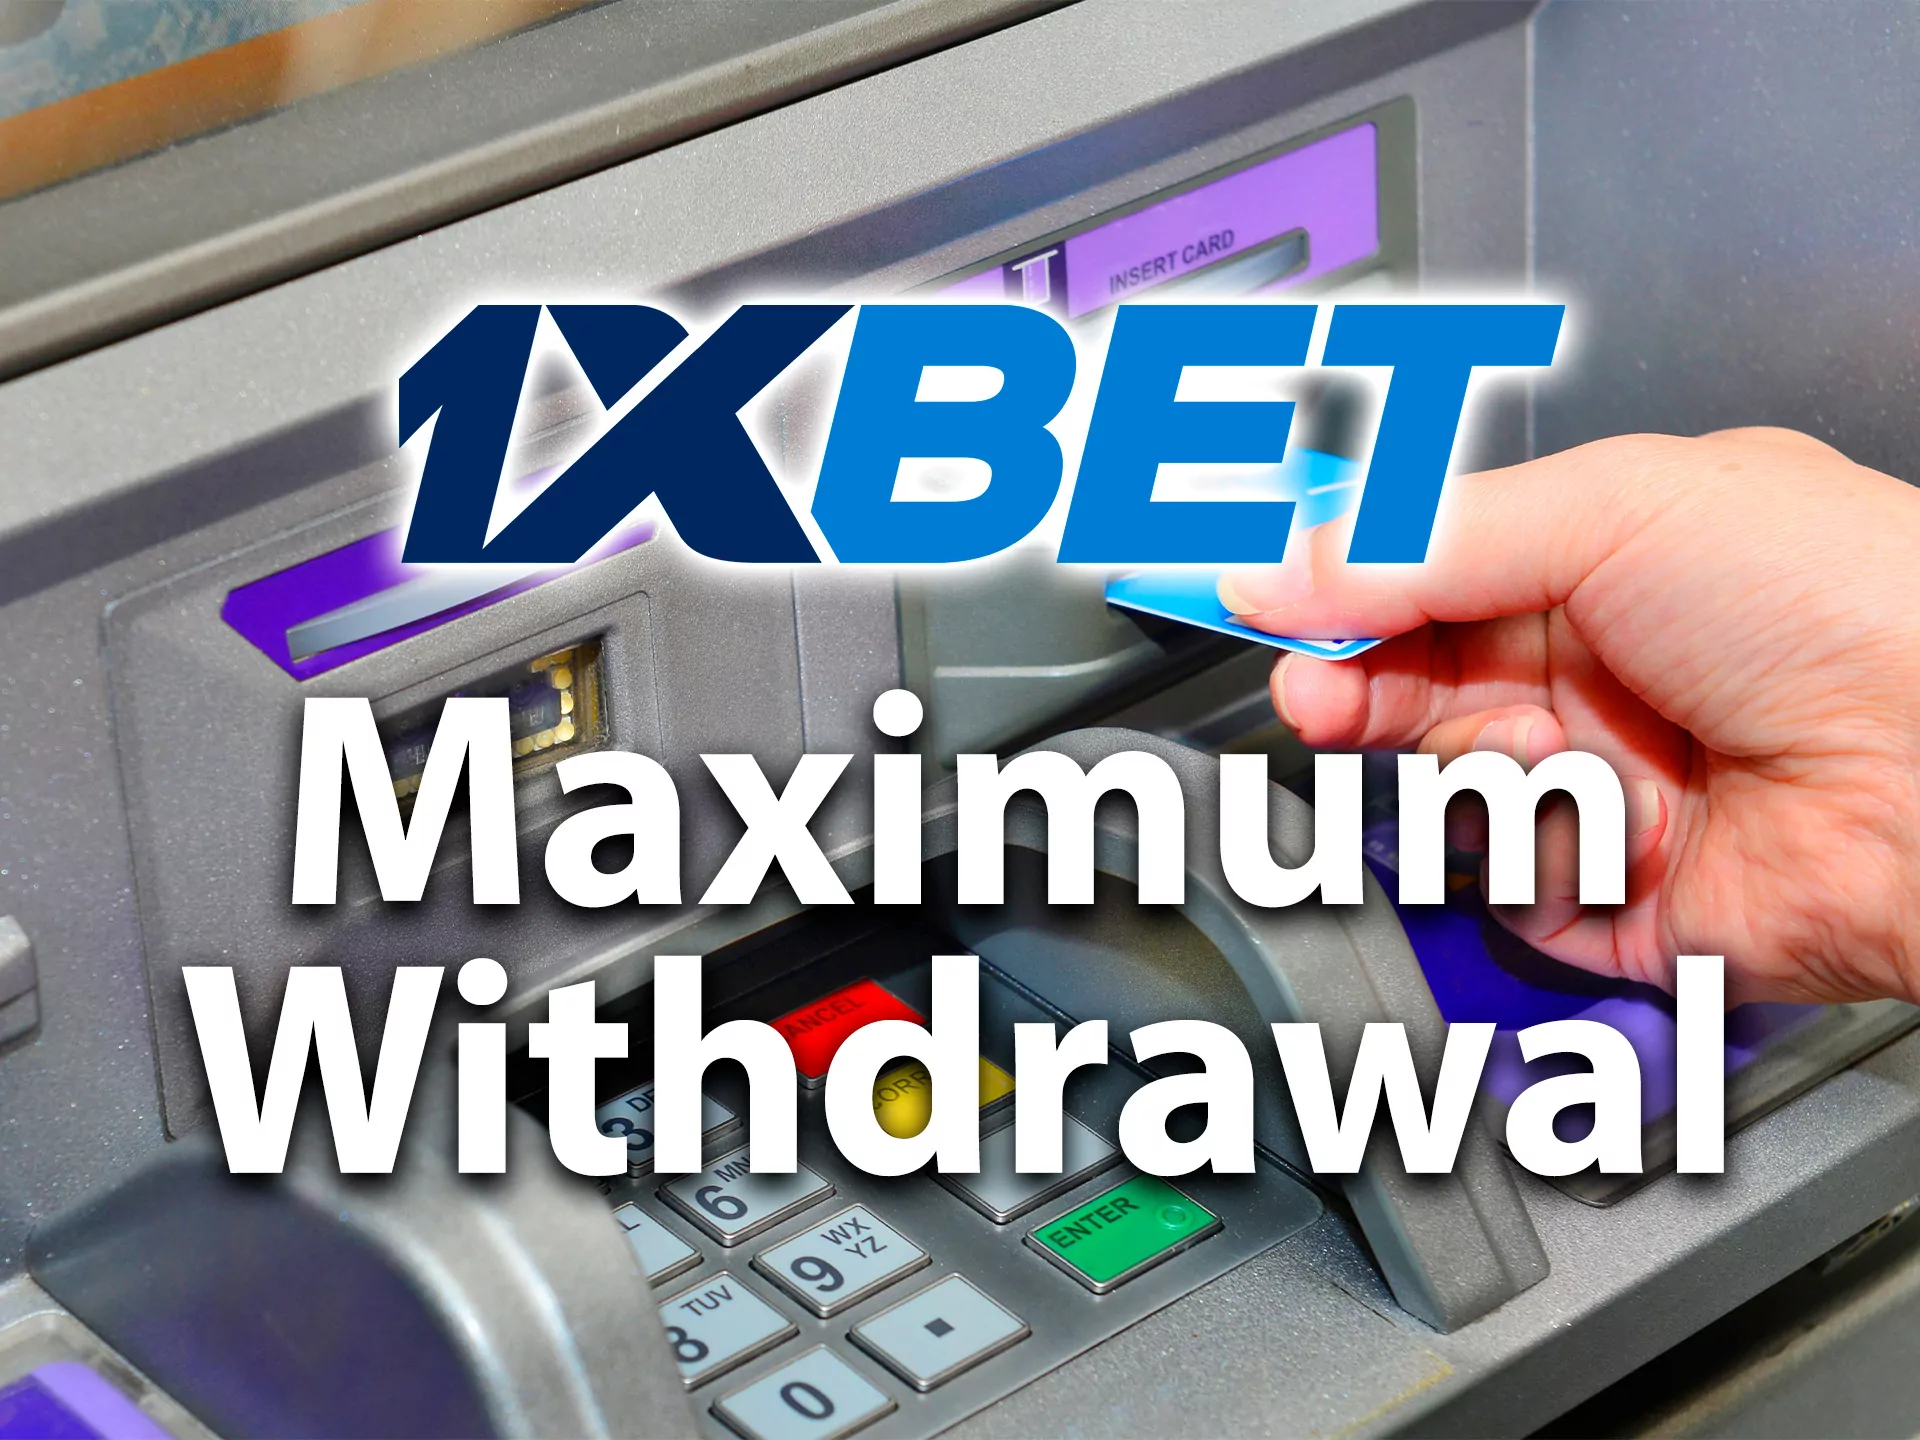 There is no specific withdrawing maximum at 1xbet.